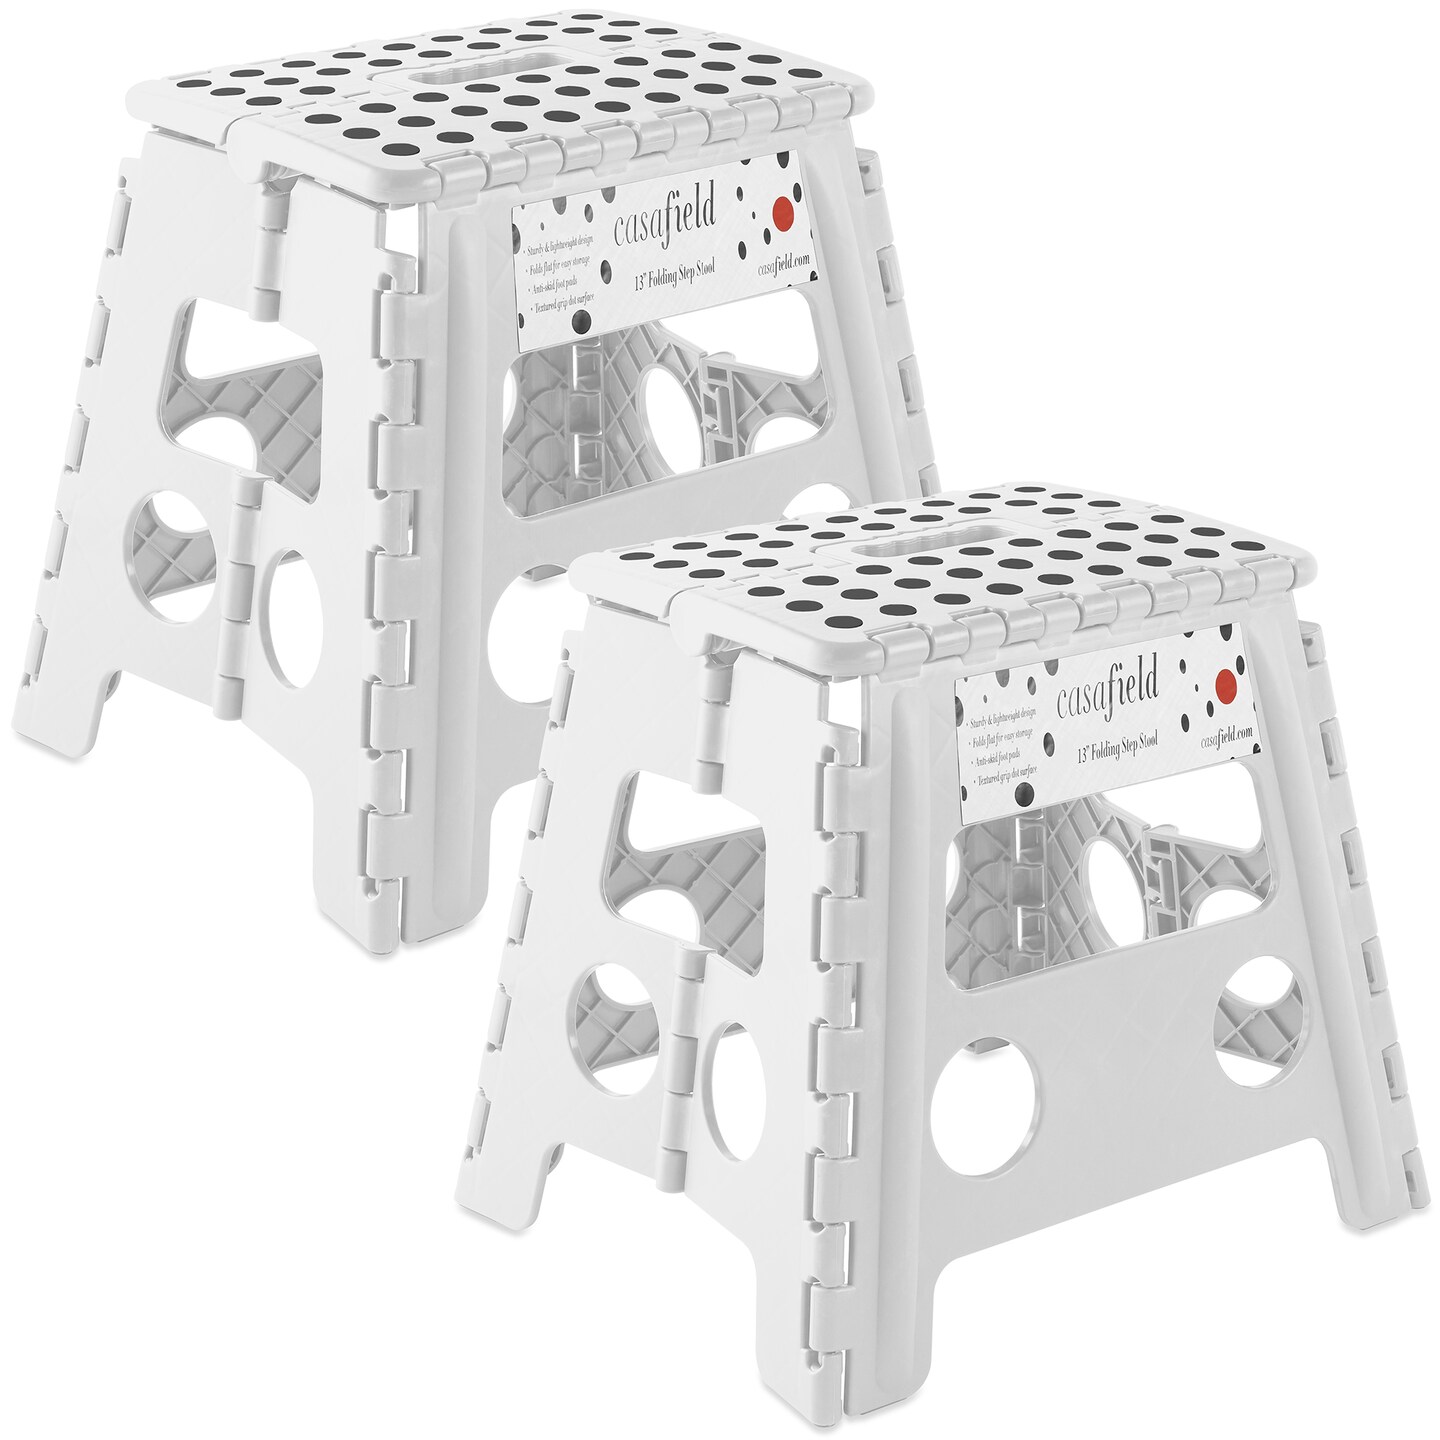 Casafield Folding Step Stools with Handle (Set of 2) - Portable Collapsible Small Plastic Foot Stool - Use in the Kitchen, Bathroom and Bedroom